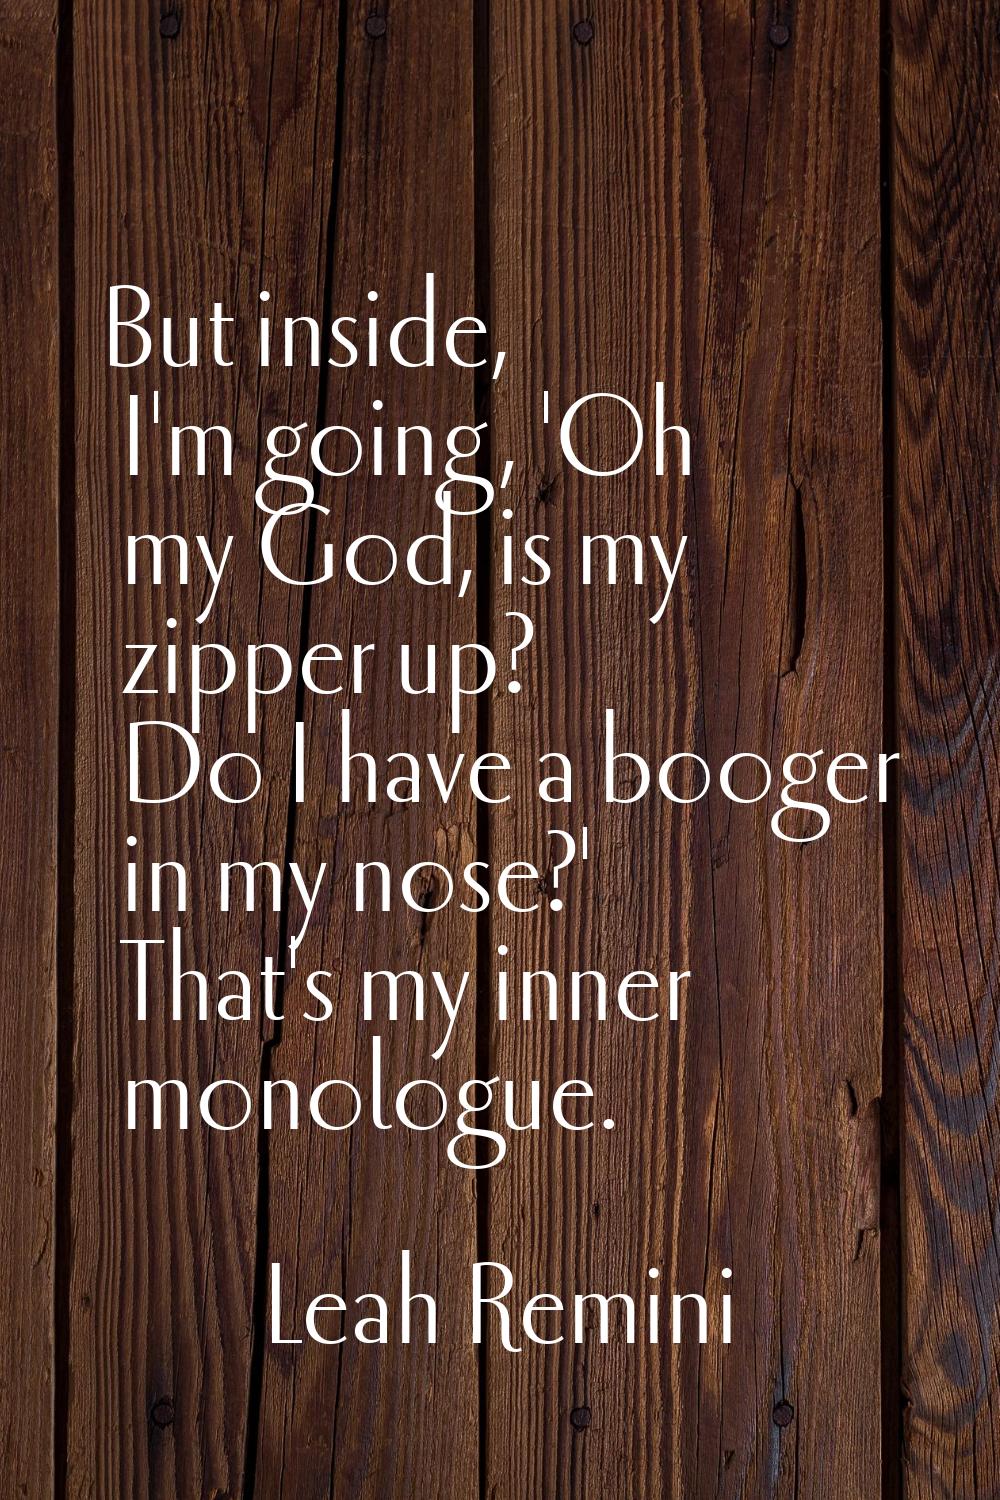 But inside, I'm going, 'Oh my God, is my zipper up? Do I have a booger in my nose?' That's my inner